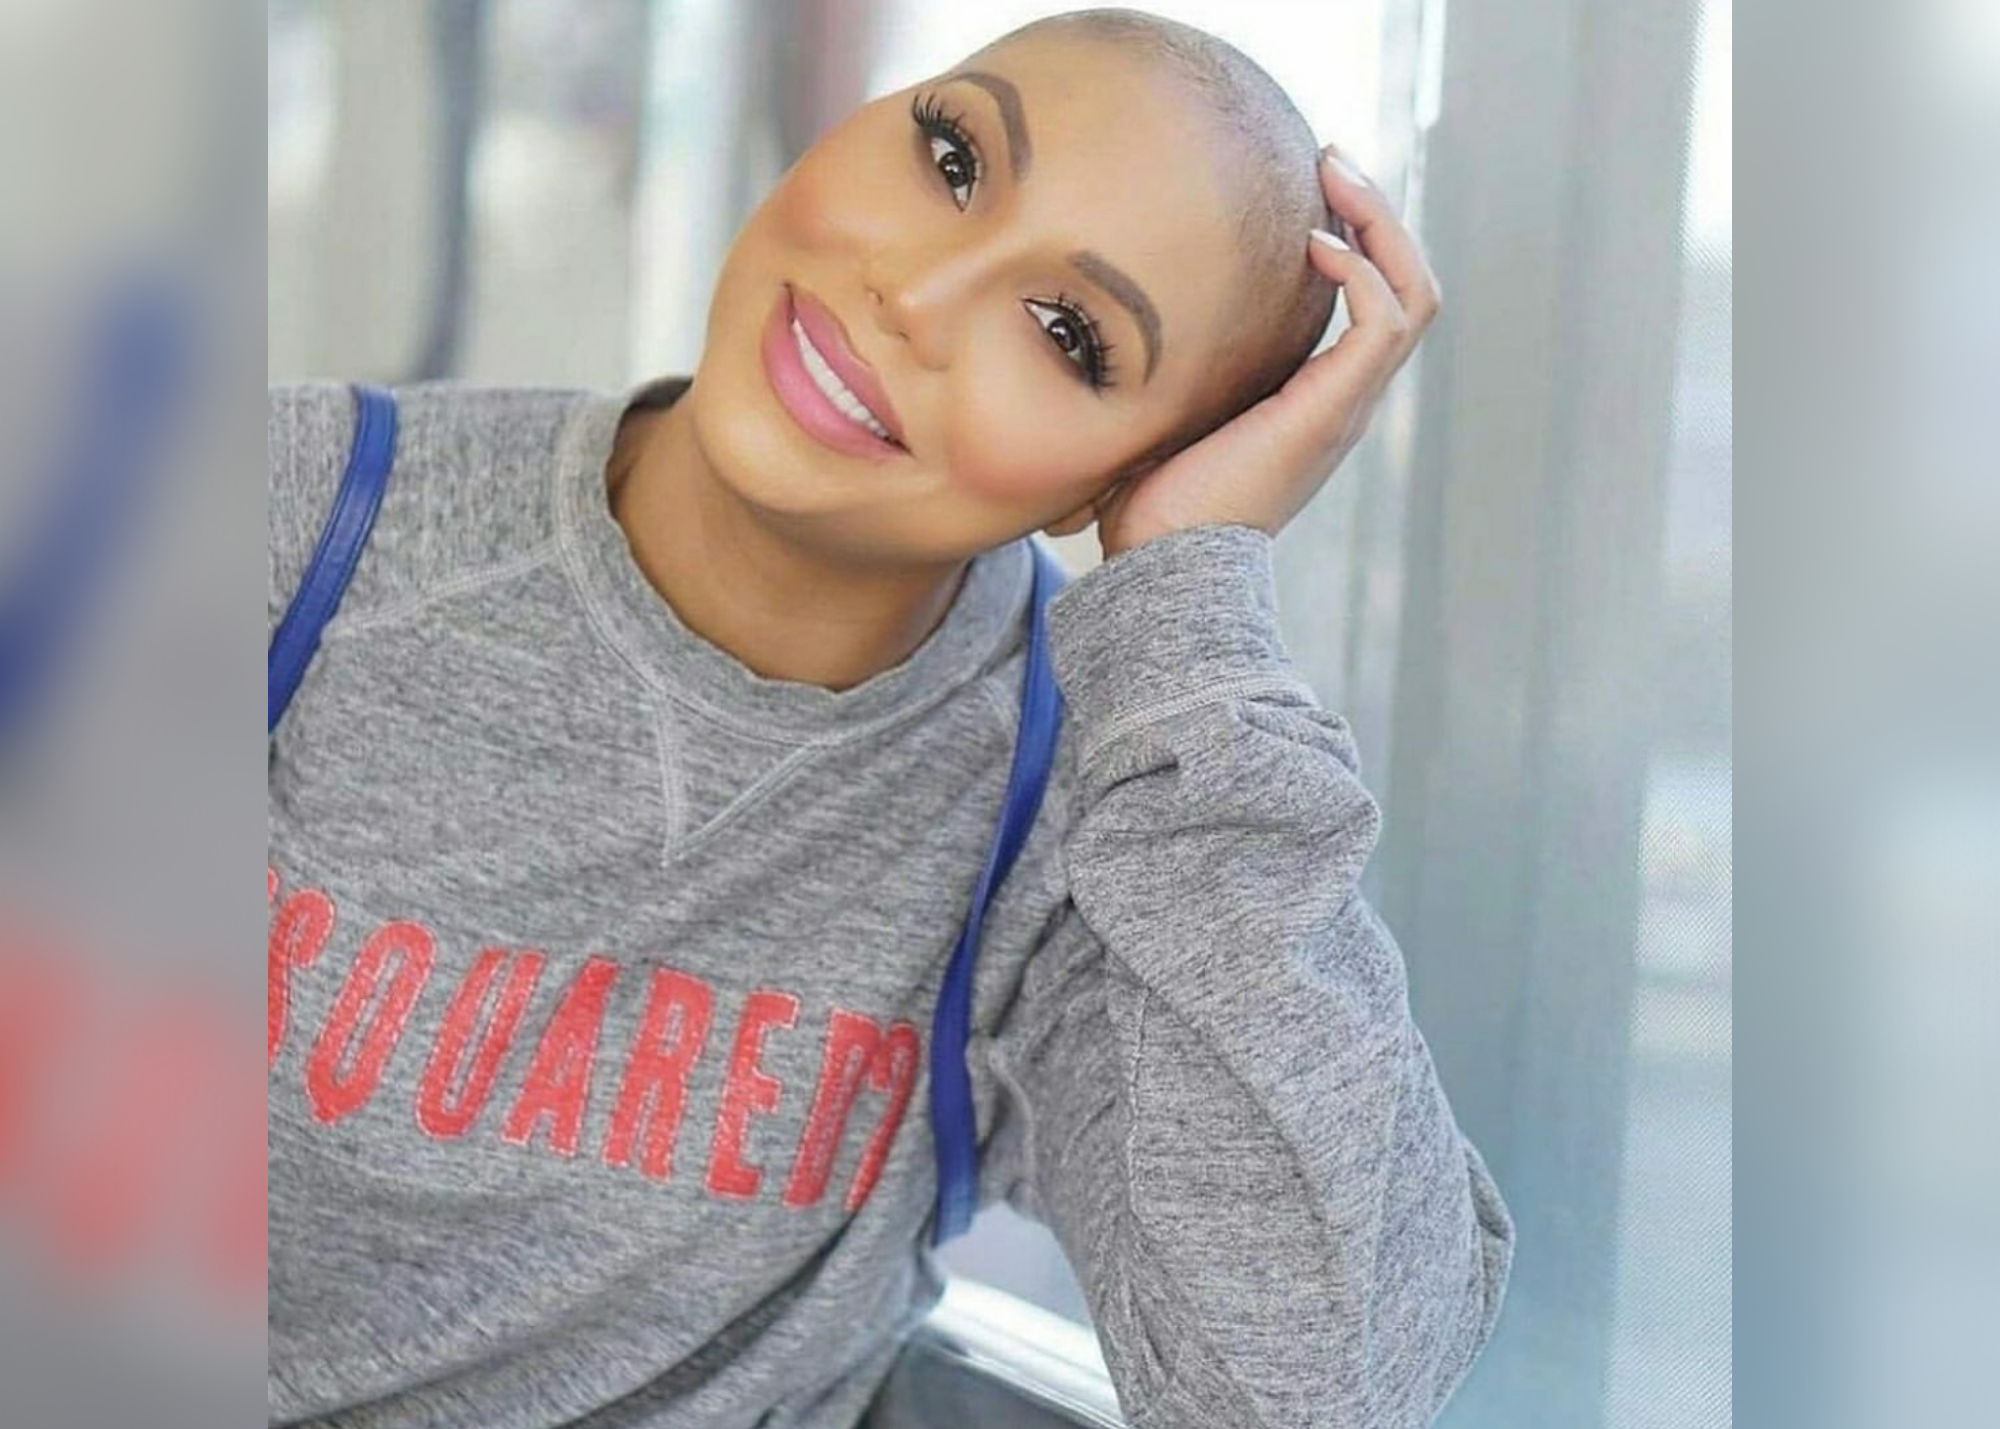 Tamar Braxton Opens Up After Hospitalization And Says She’s On A “Path To Healing”